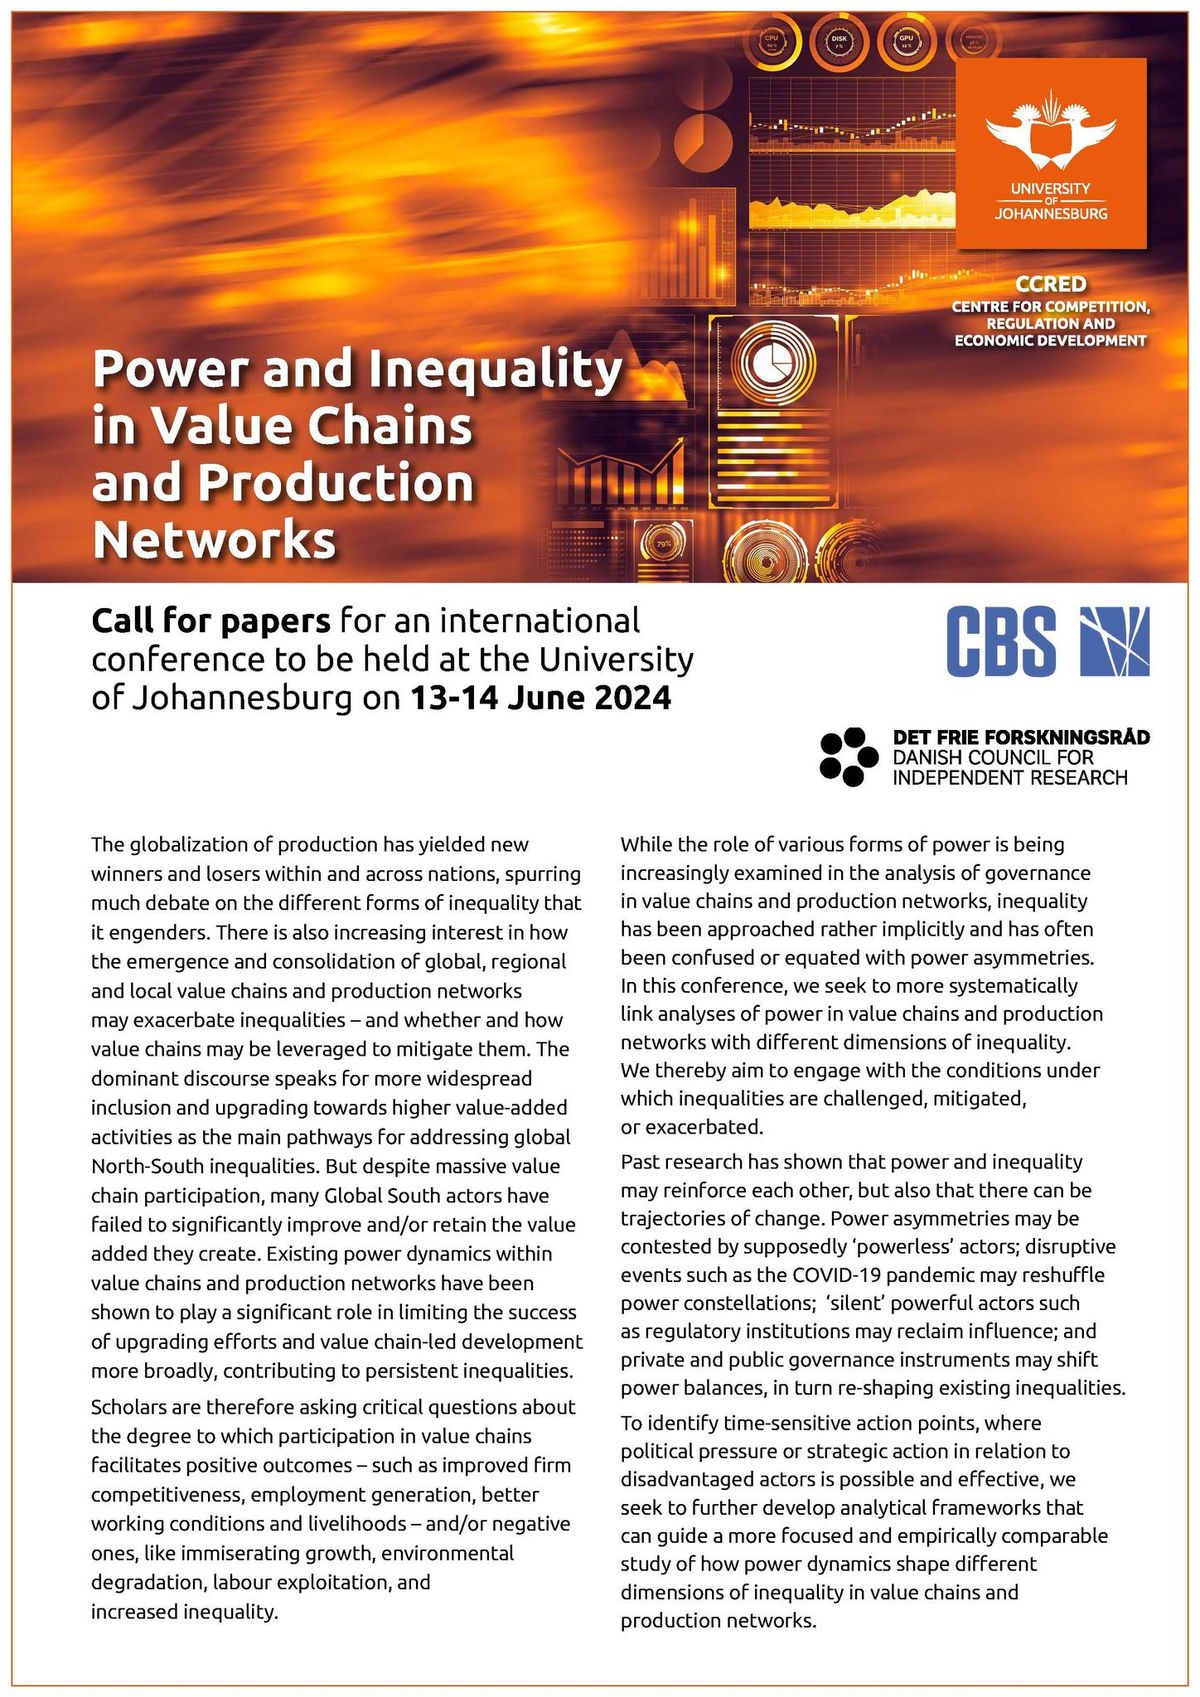 Power and Inequality in Value Chains and Production Networks